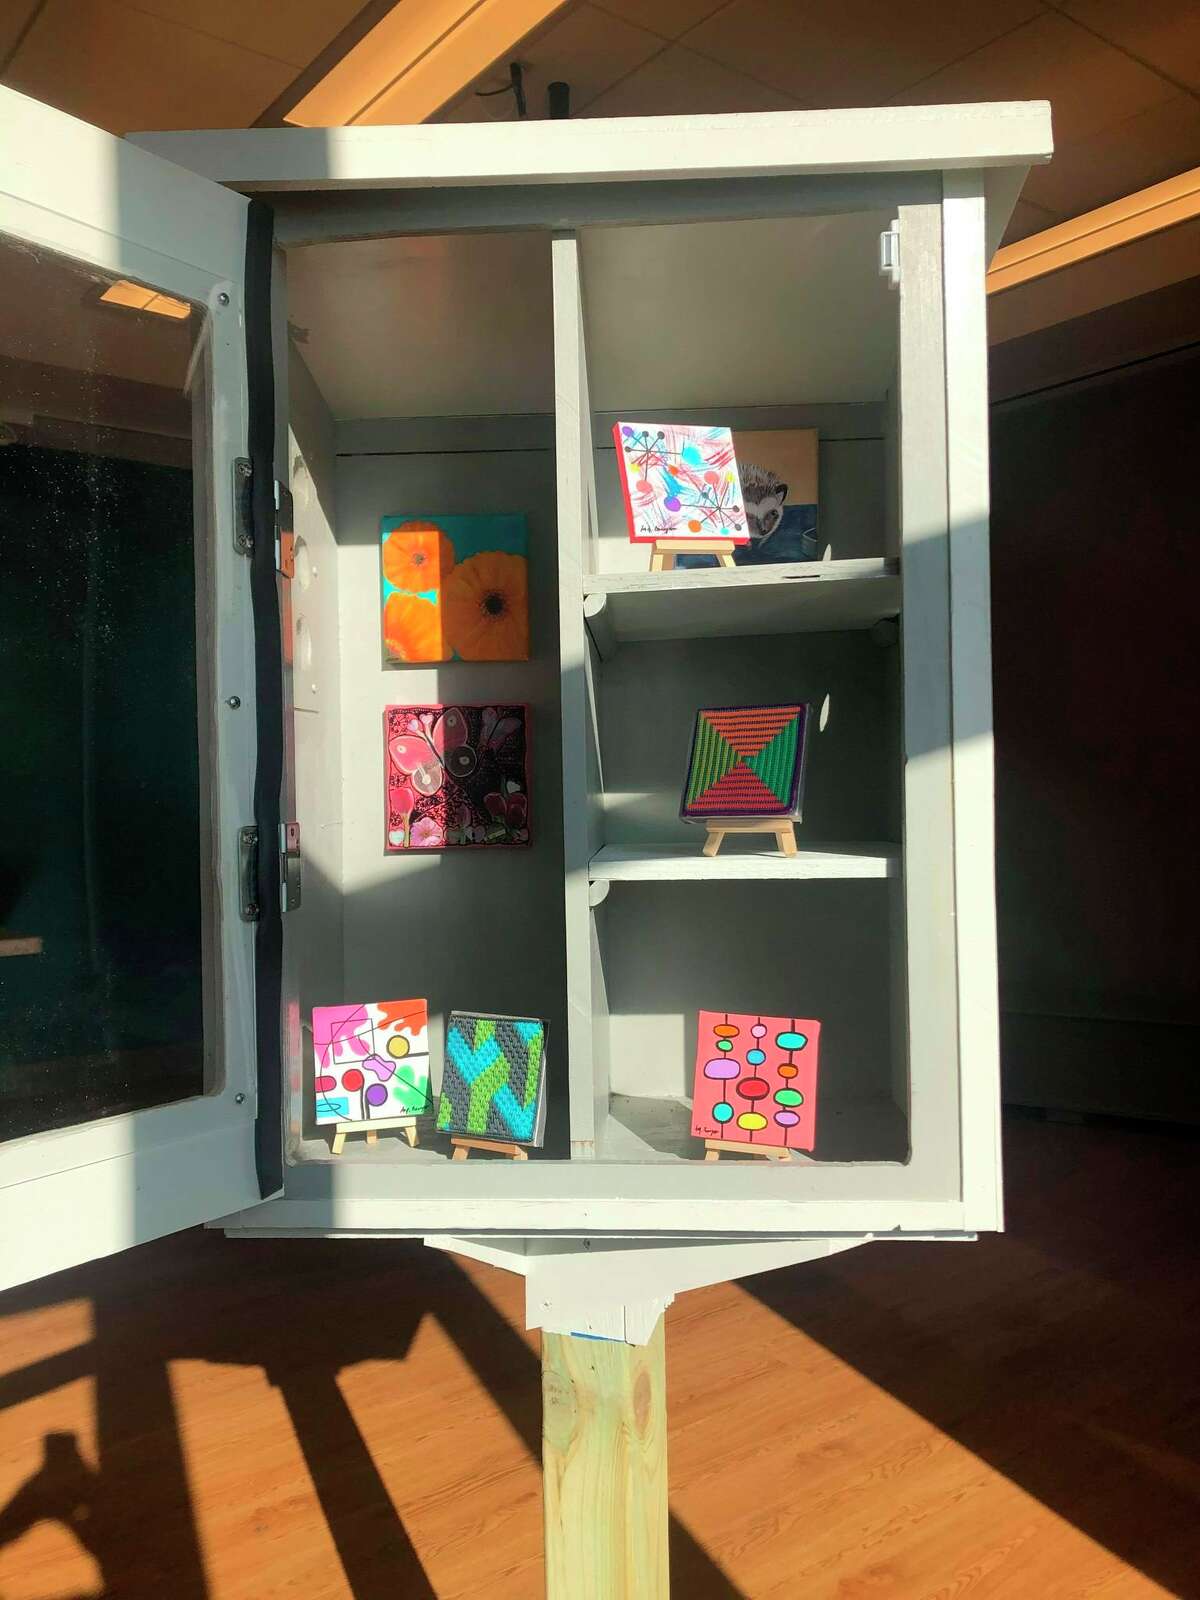 The Little Free Galleries program will function much like the Little Free Libraries with the idea of: need art, take art; have art, leave art. (Courtesy Photo)